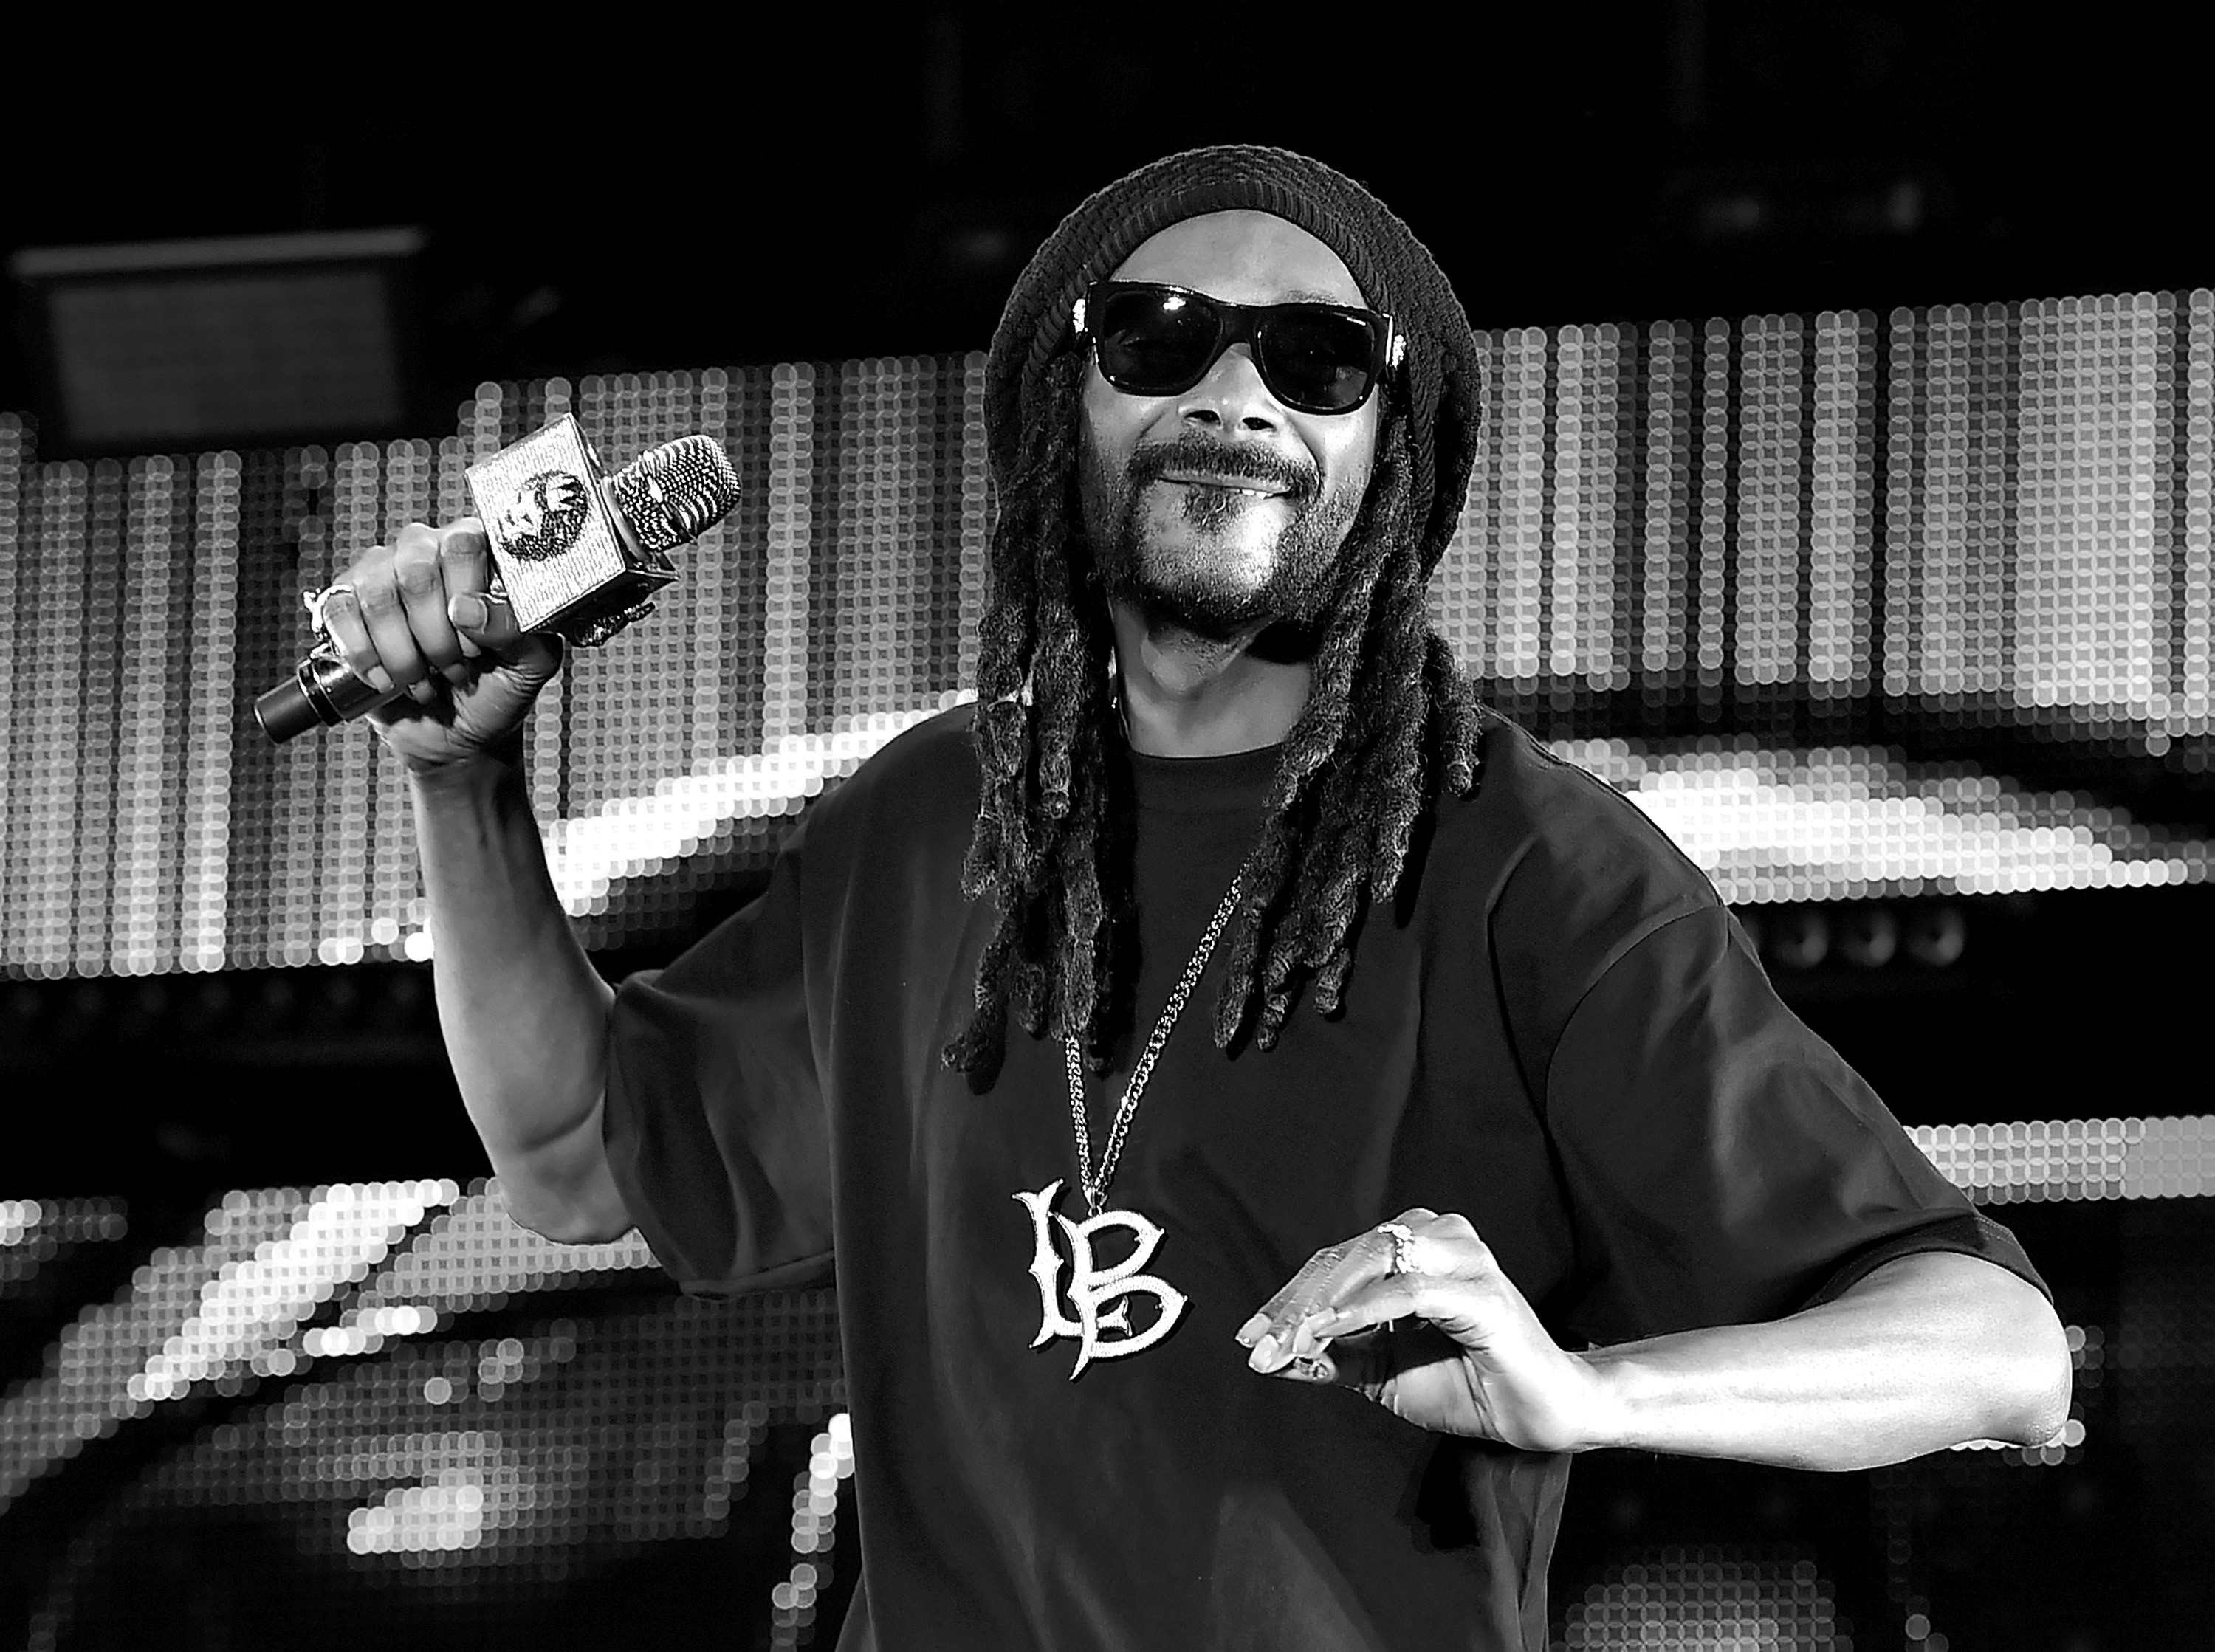 Snoop Dogg at 2016 Stagecoach California's Country Music Festival - Day 1